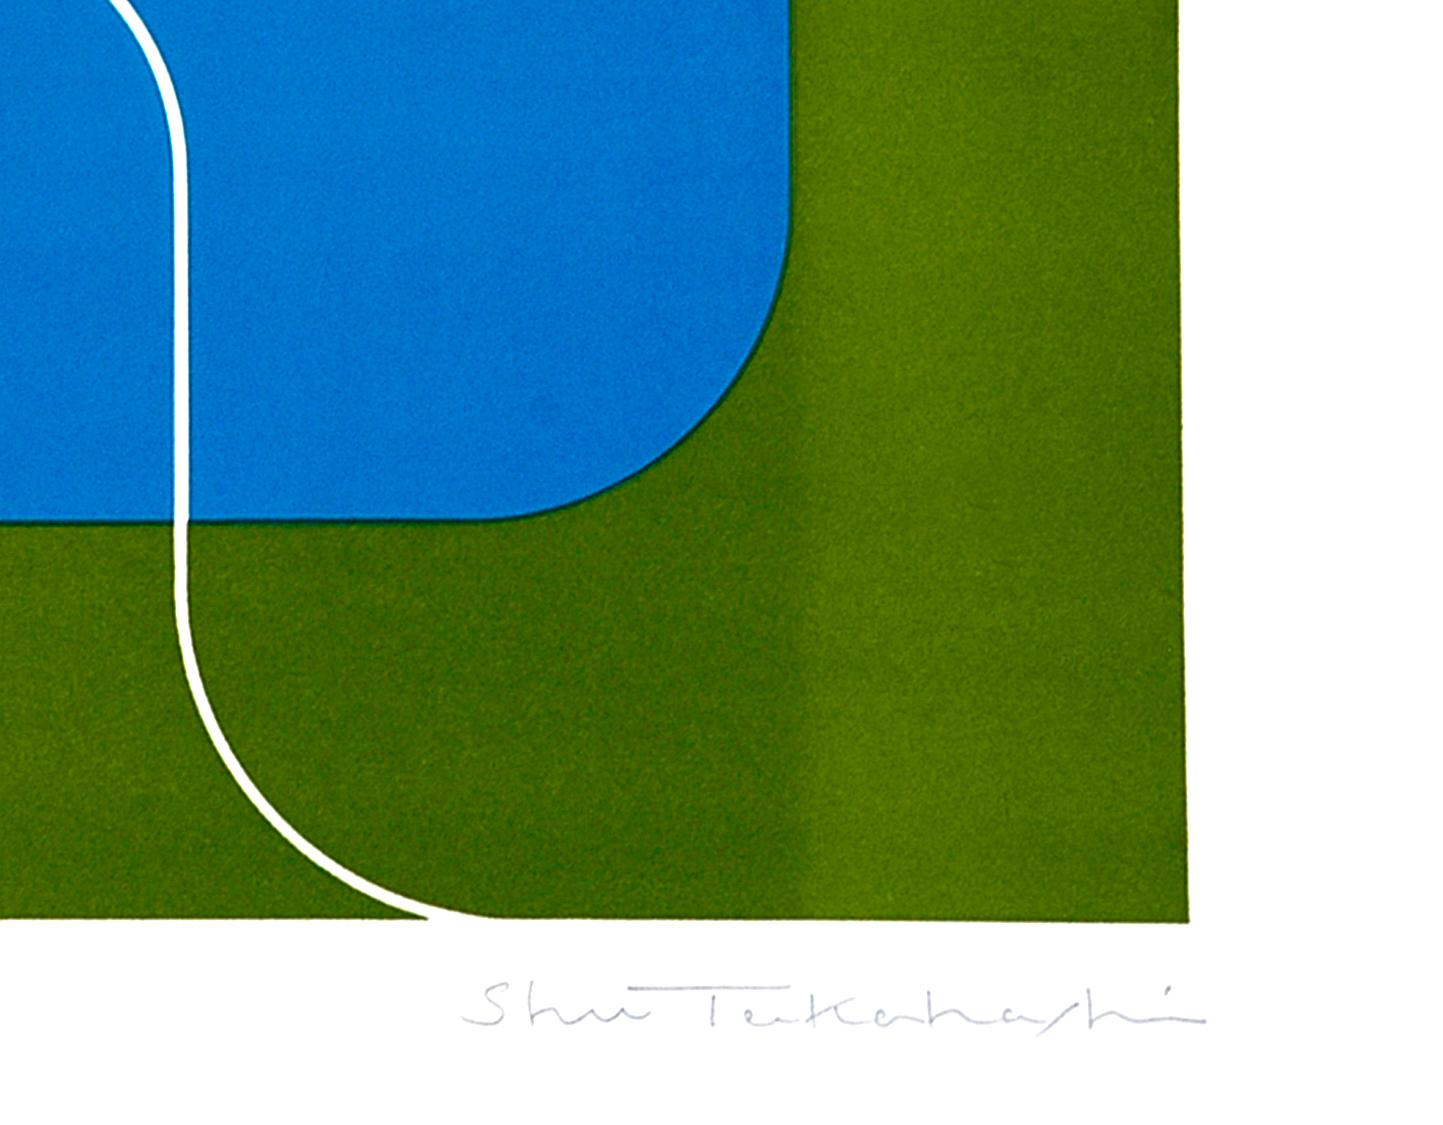 A Fresh Wind - Chalcography an Screen Print by Shu Takahashi - 1970s For Sale 1